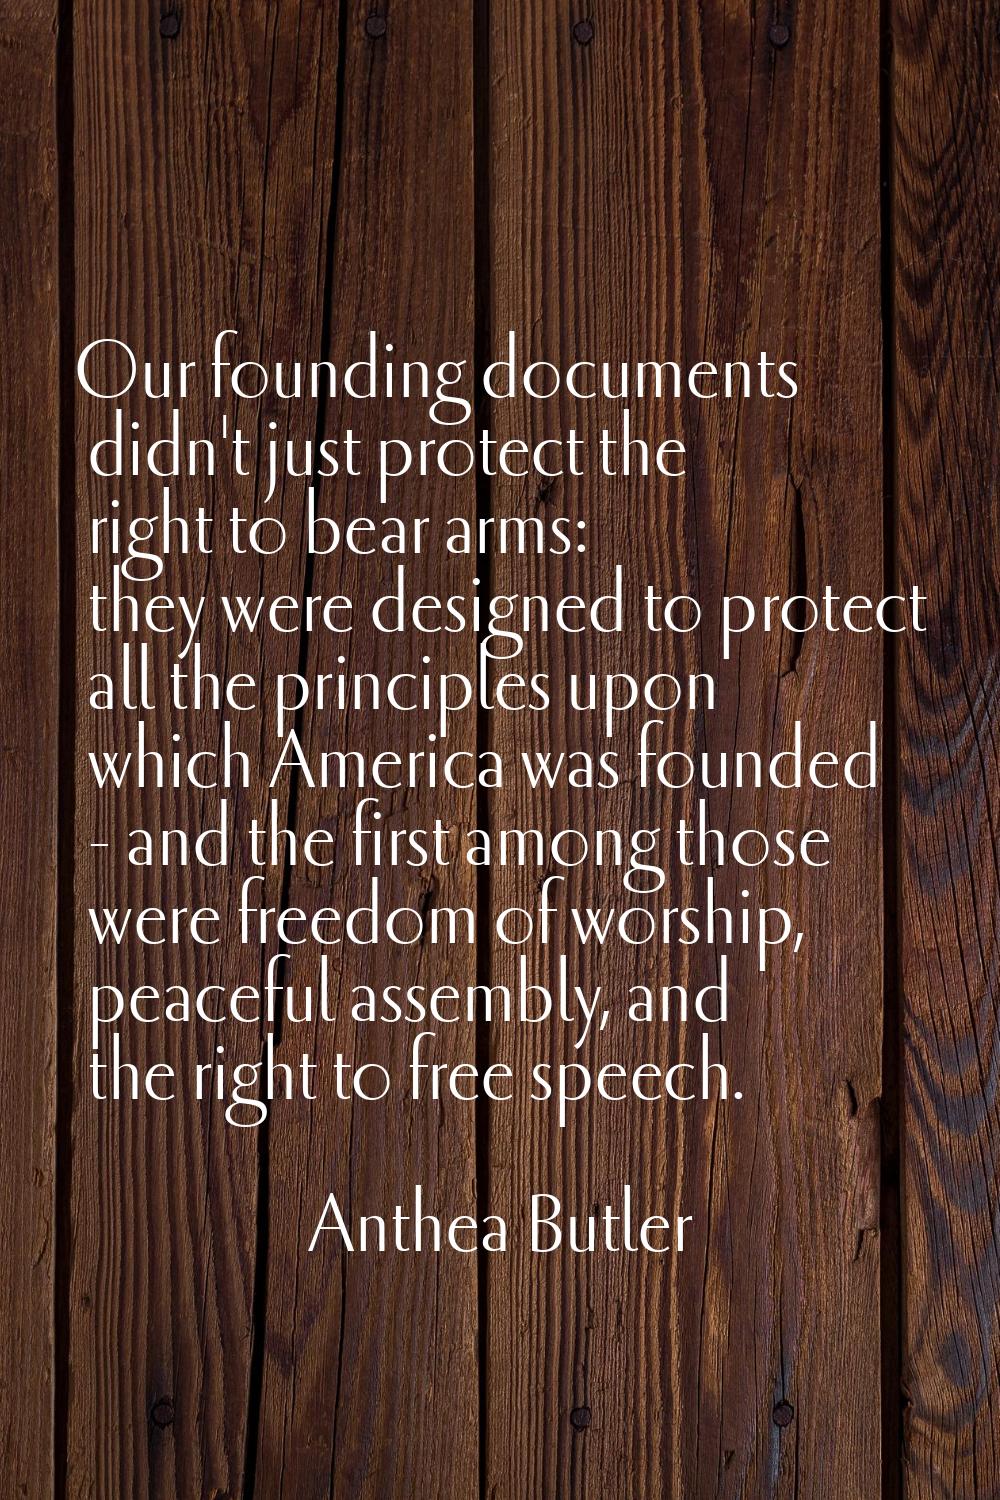 Our founding documents didn't just protect the right to bear arms: they were designed to protect al